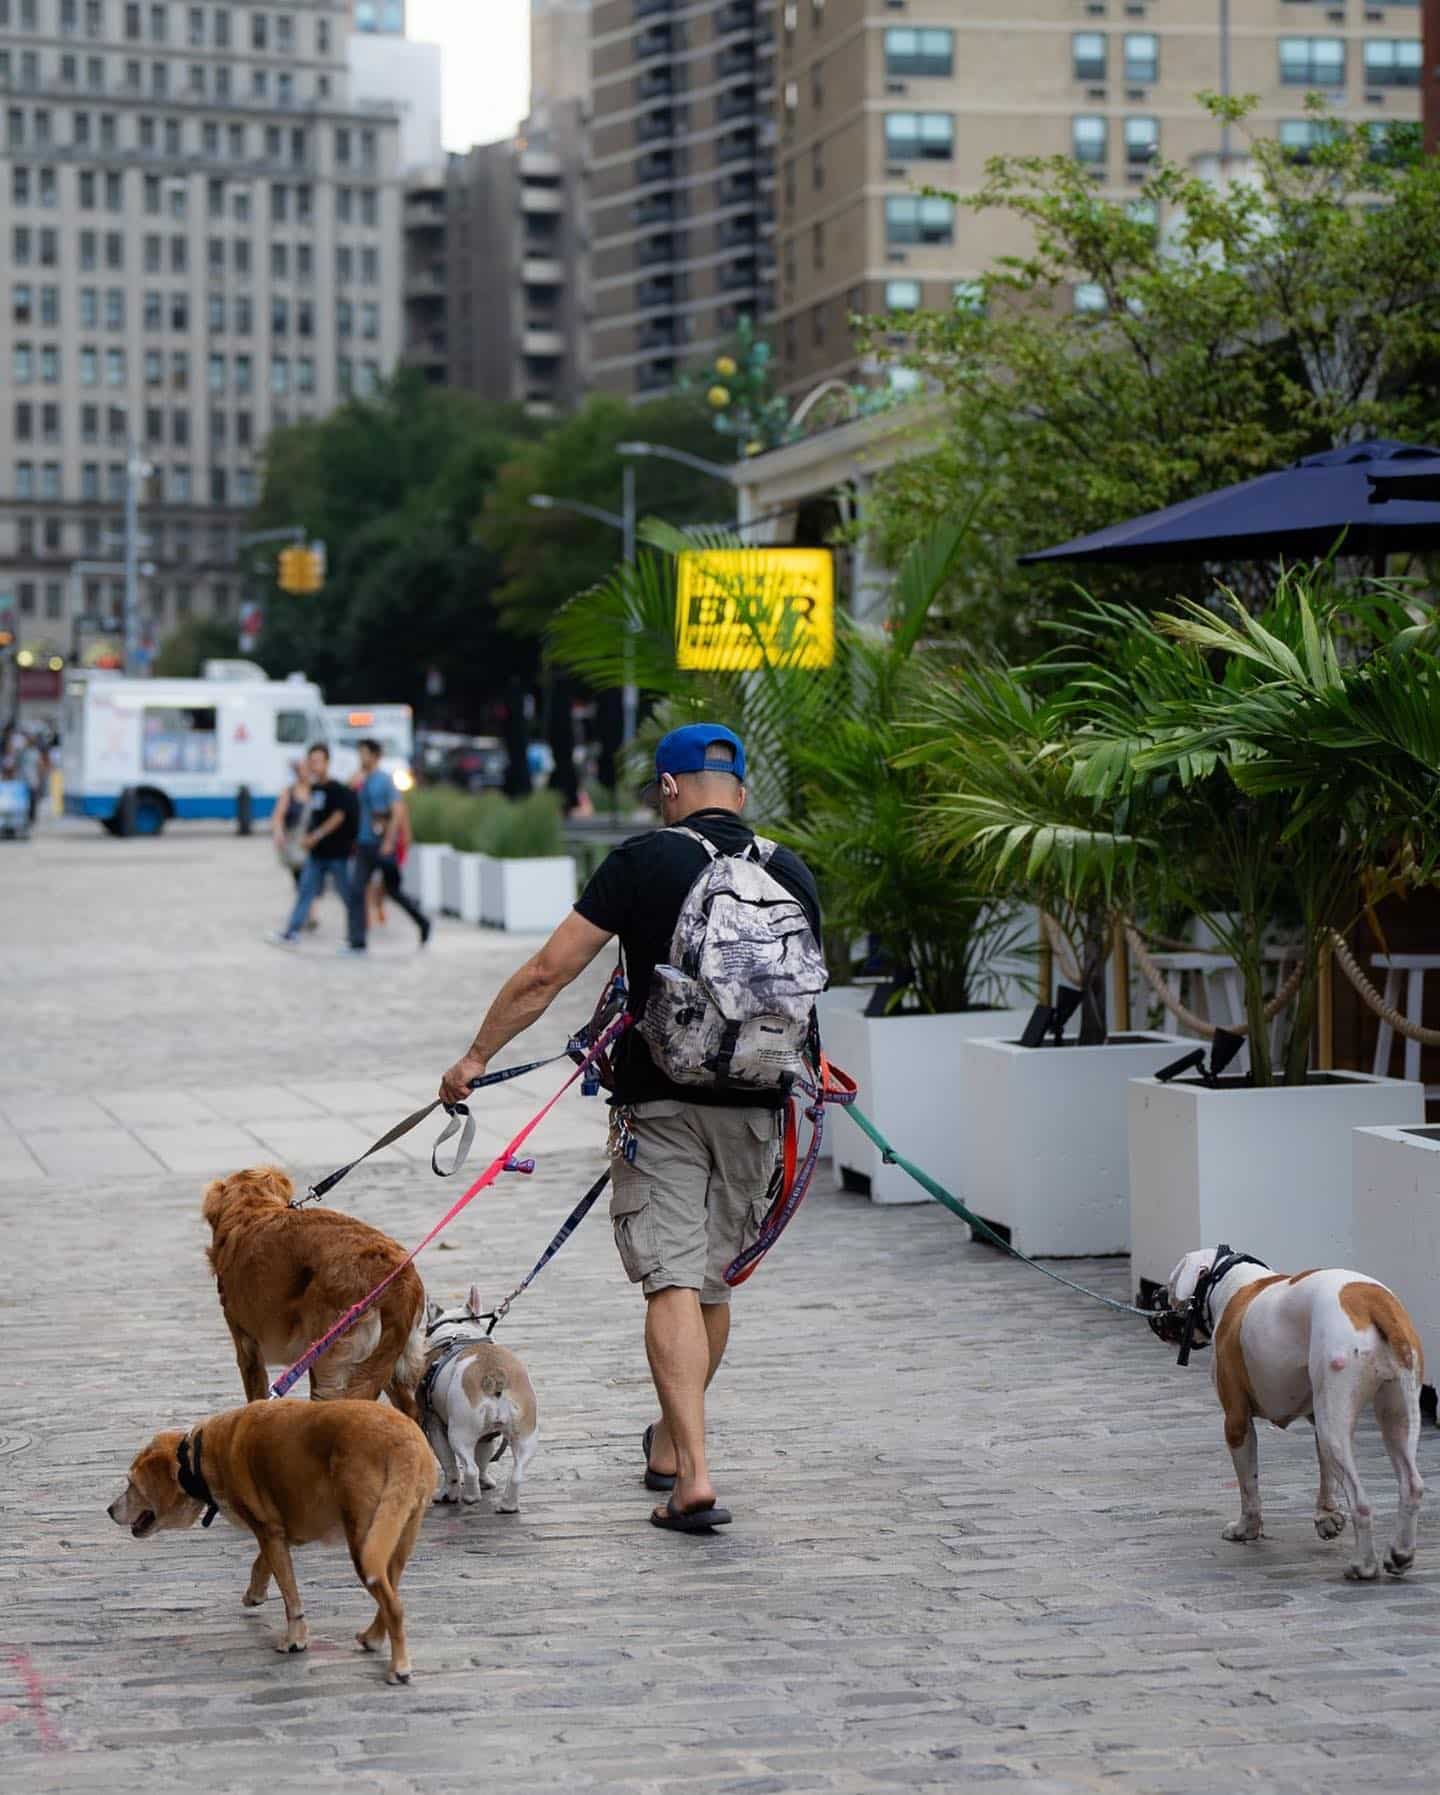 Rain or shine. Time for a stroll. Furry friends welcome. Get Lost. Find New York. #TheSeaport